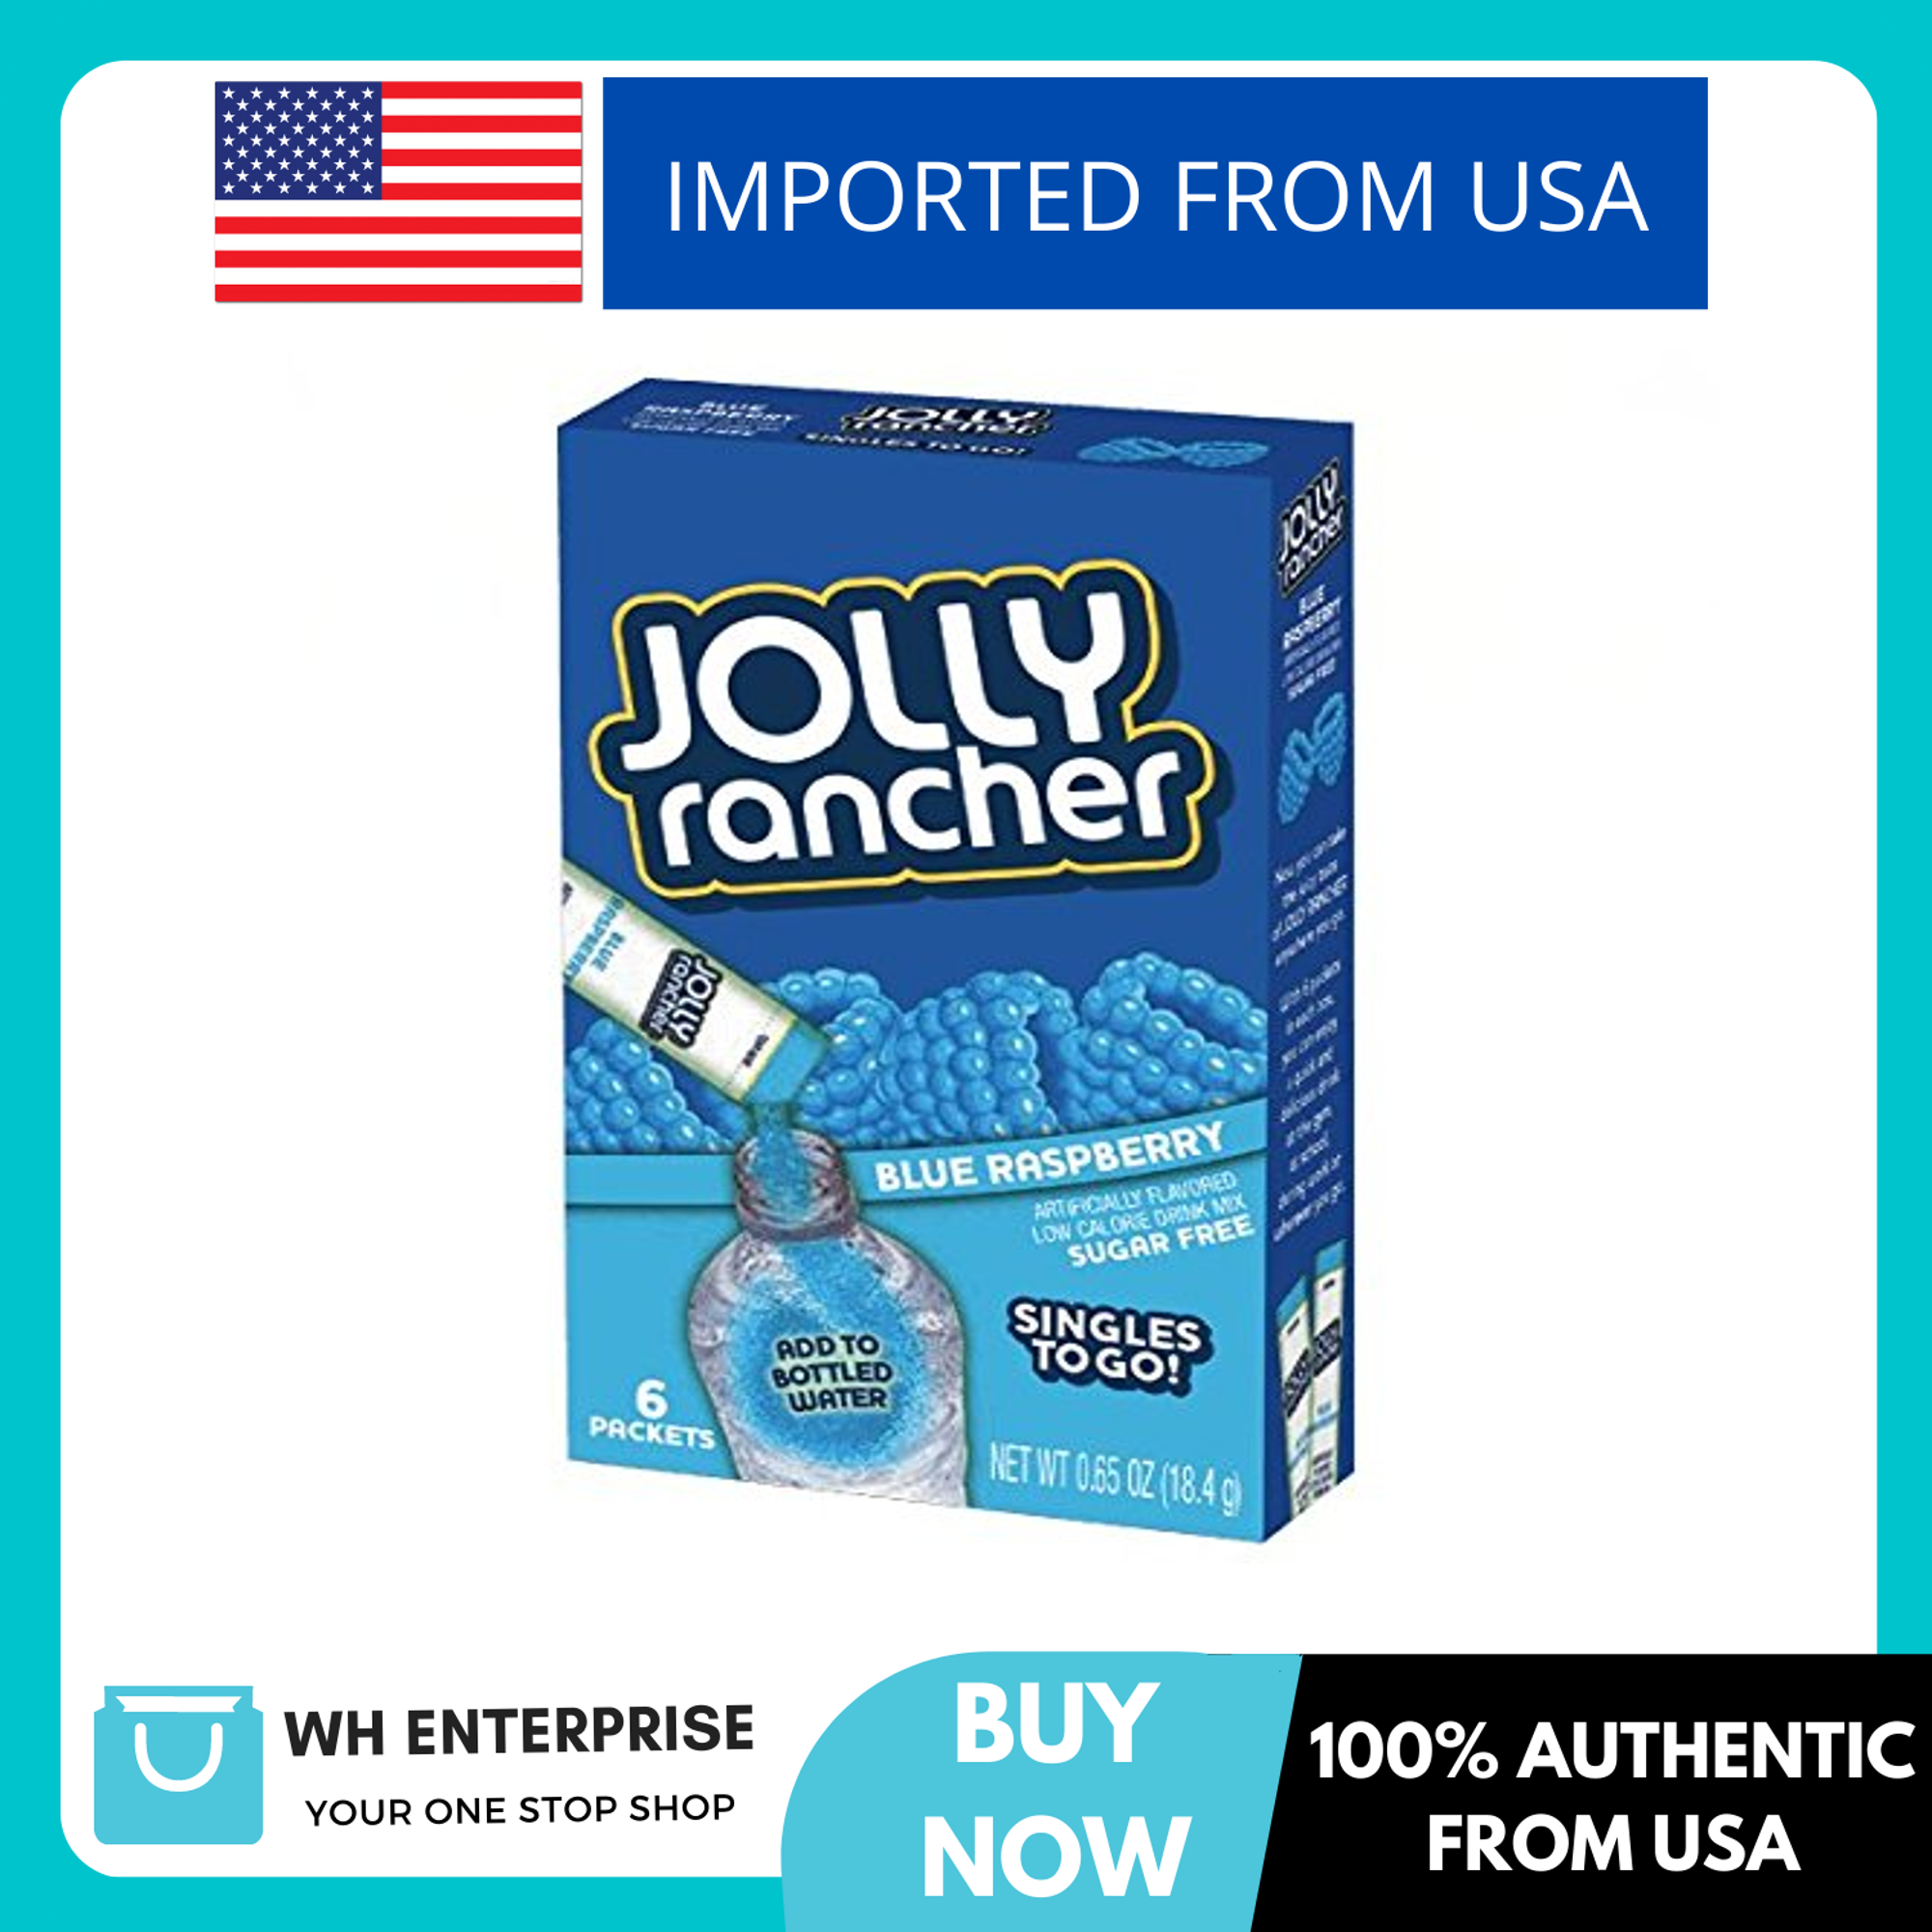 Jolly Rancher Singles To Go Powdered Drink Mix 6 Count Box 12 Pack A Blue Raspberry A Sugar Free Drink Powder Just Add Water Pre Order Lazada Singapore